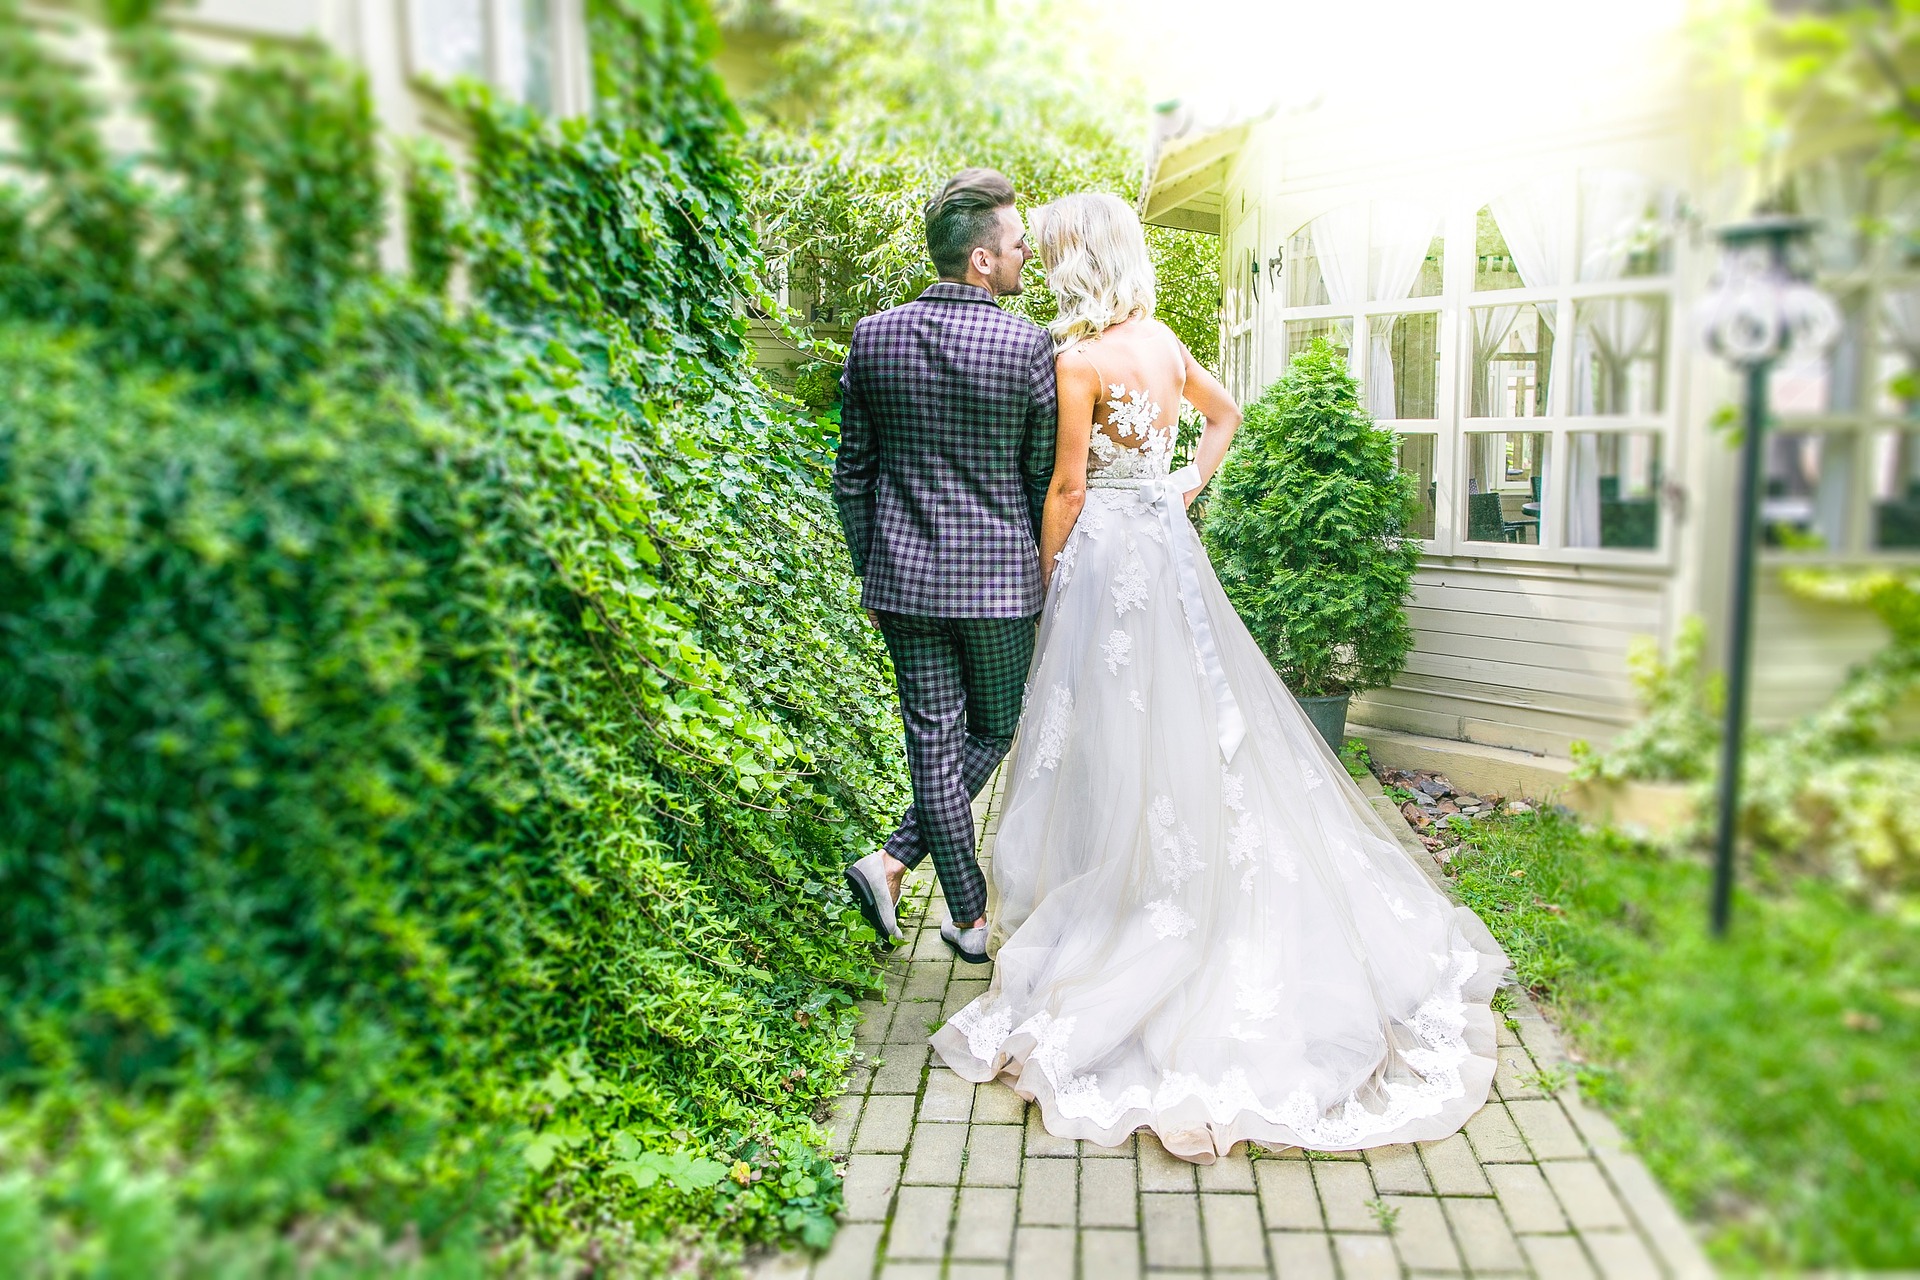 Are you looking for a wedding reception venue in Ann Arbor, Michigan? You have many options to meet your wedding personality, like this bride and groom walking along a path outdoors.